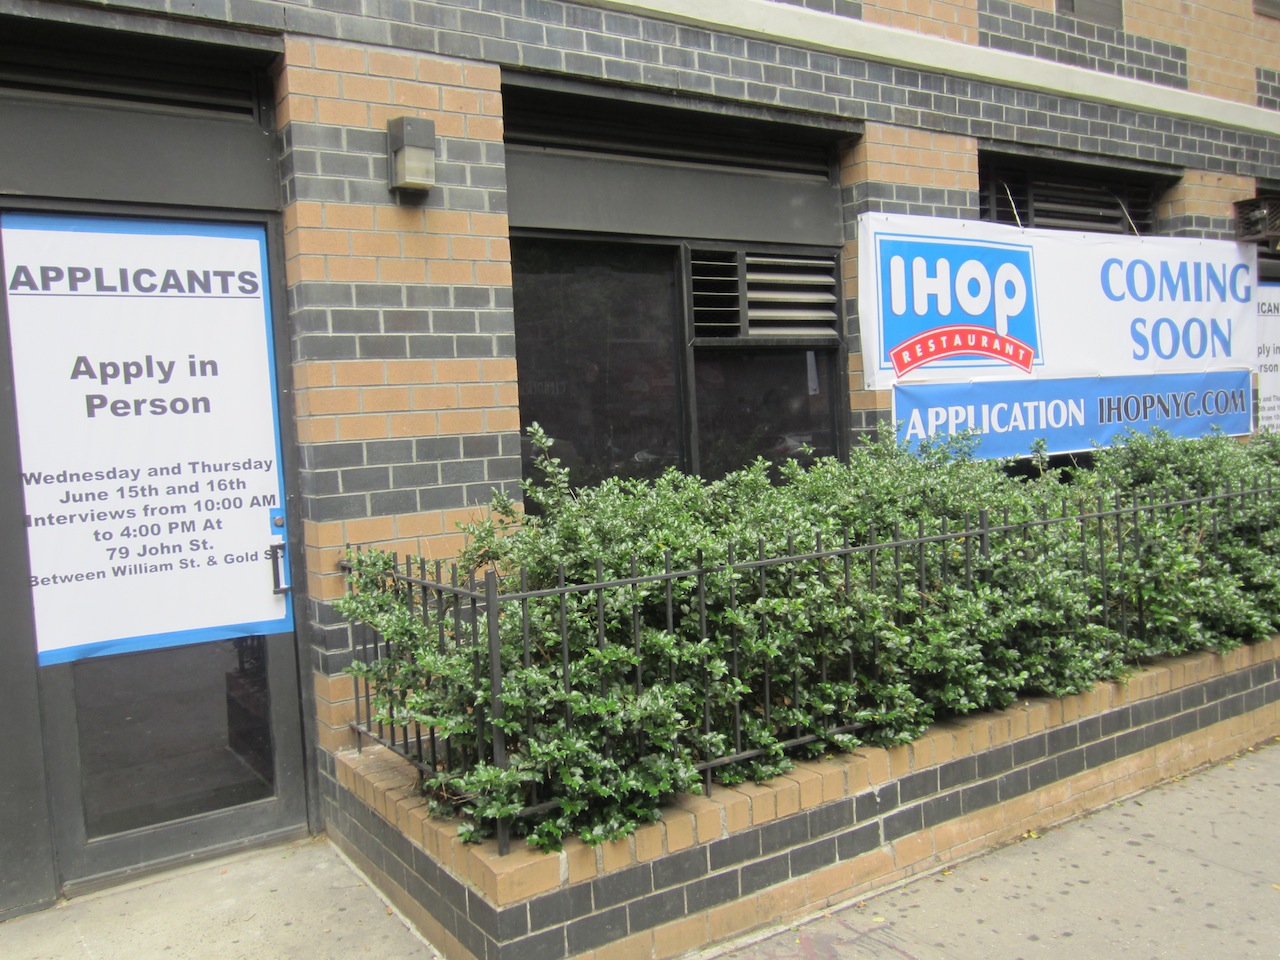 A IHOP restaurant on East 14th St in the East Village neighborhood